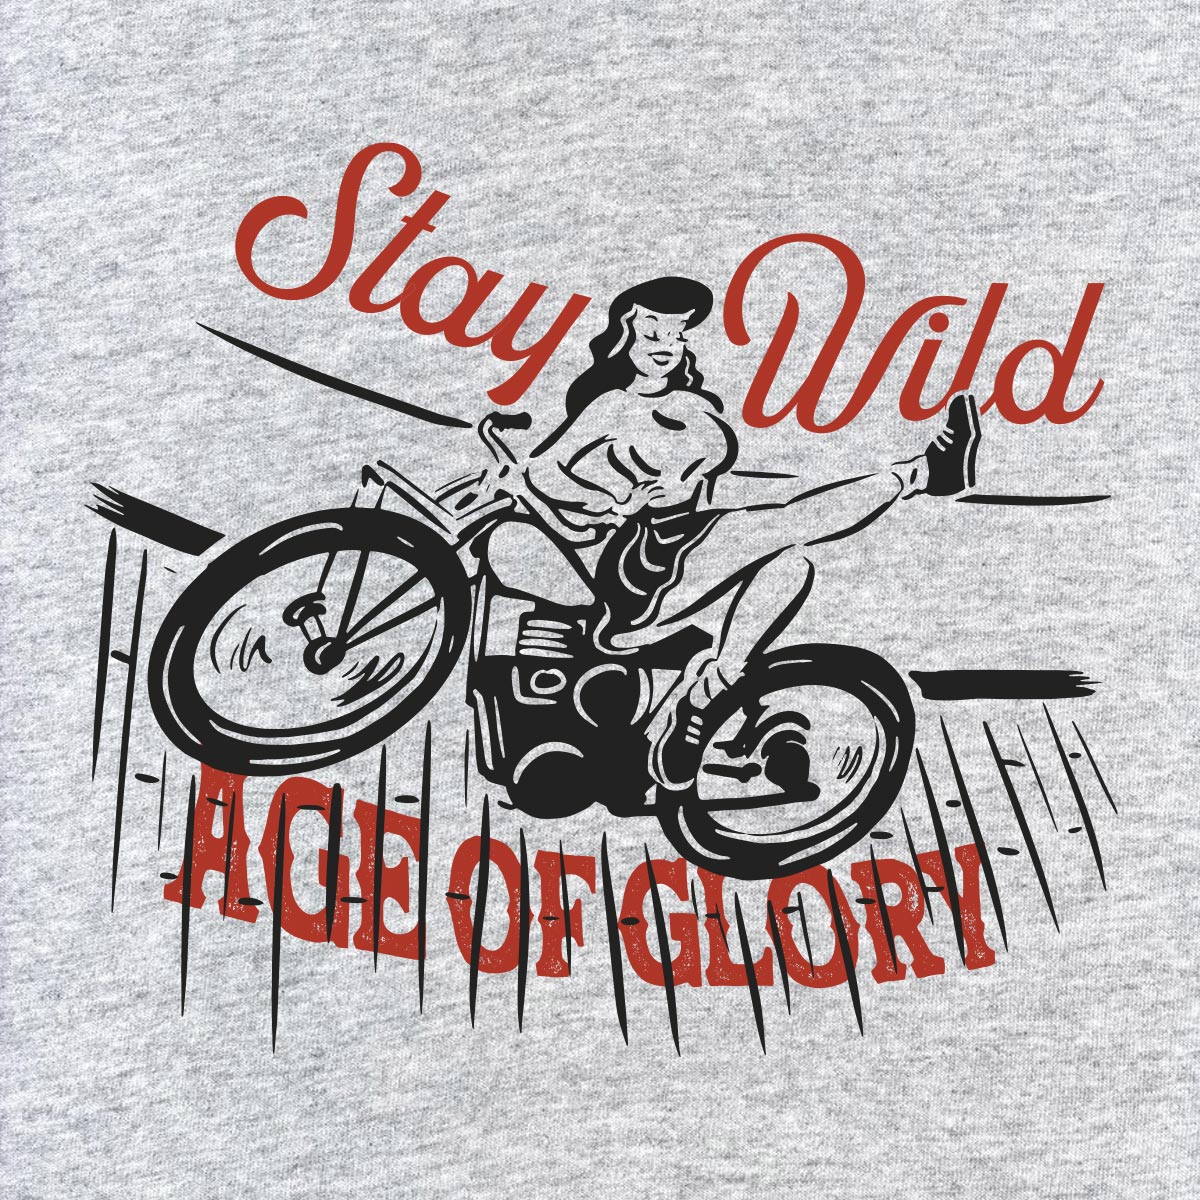 Age of Glory Wall of Death T-Shirt